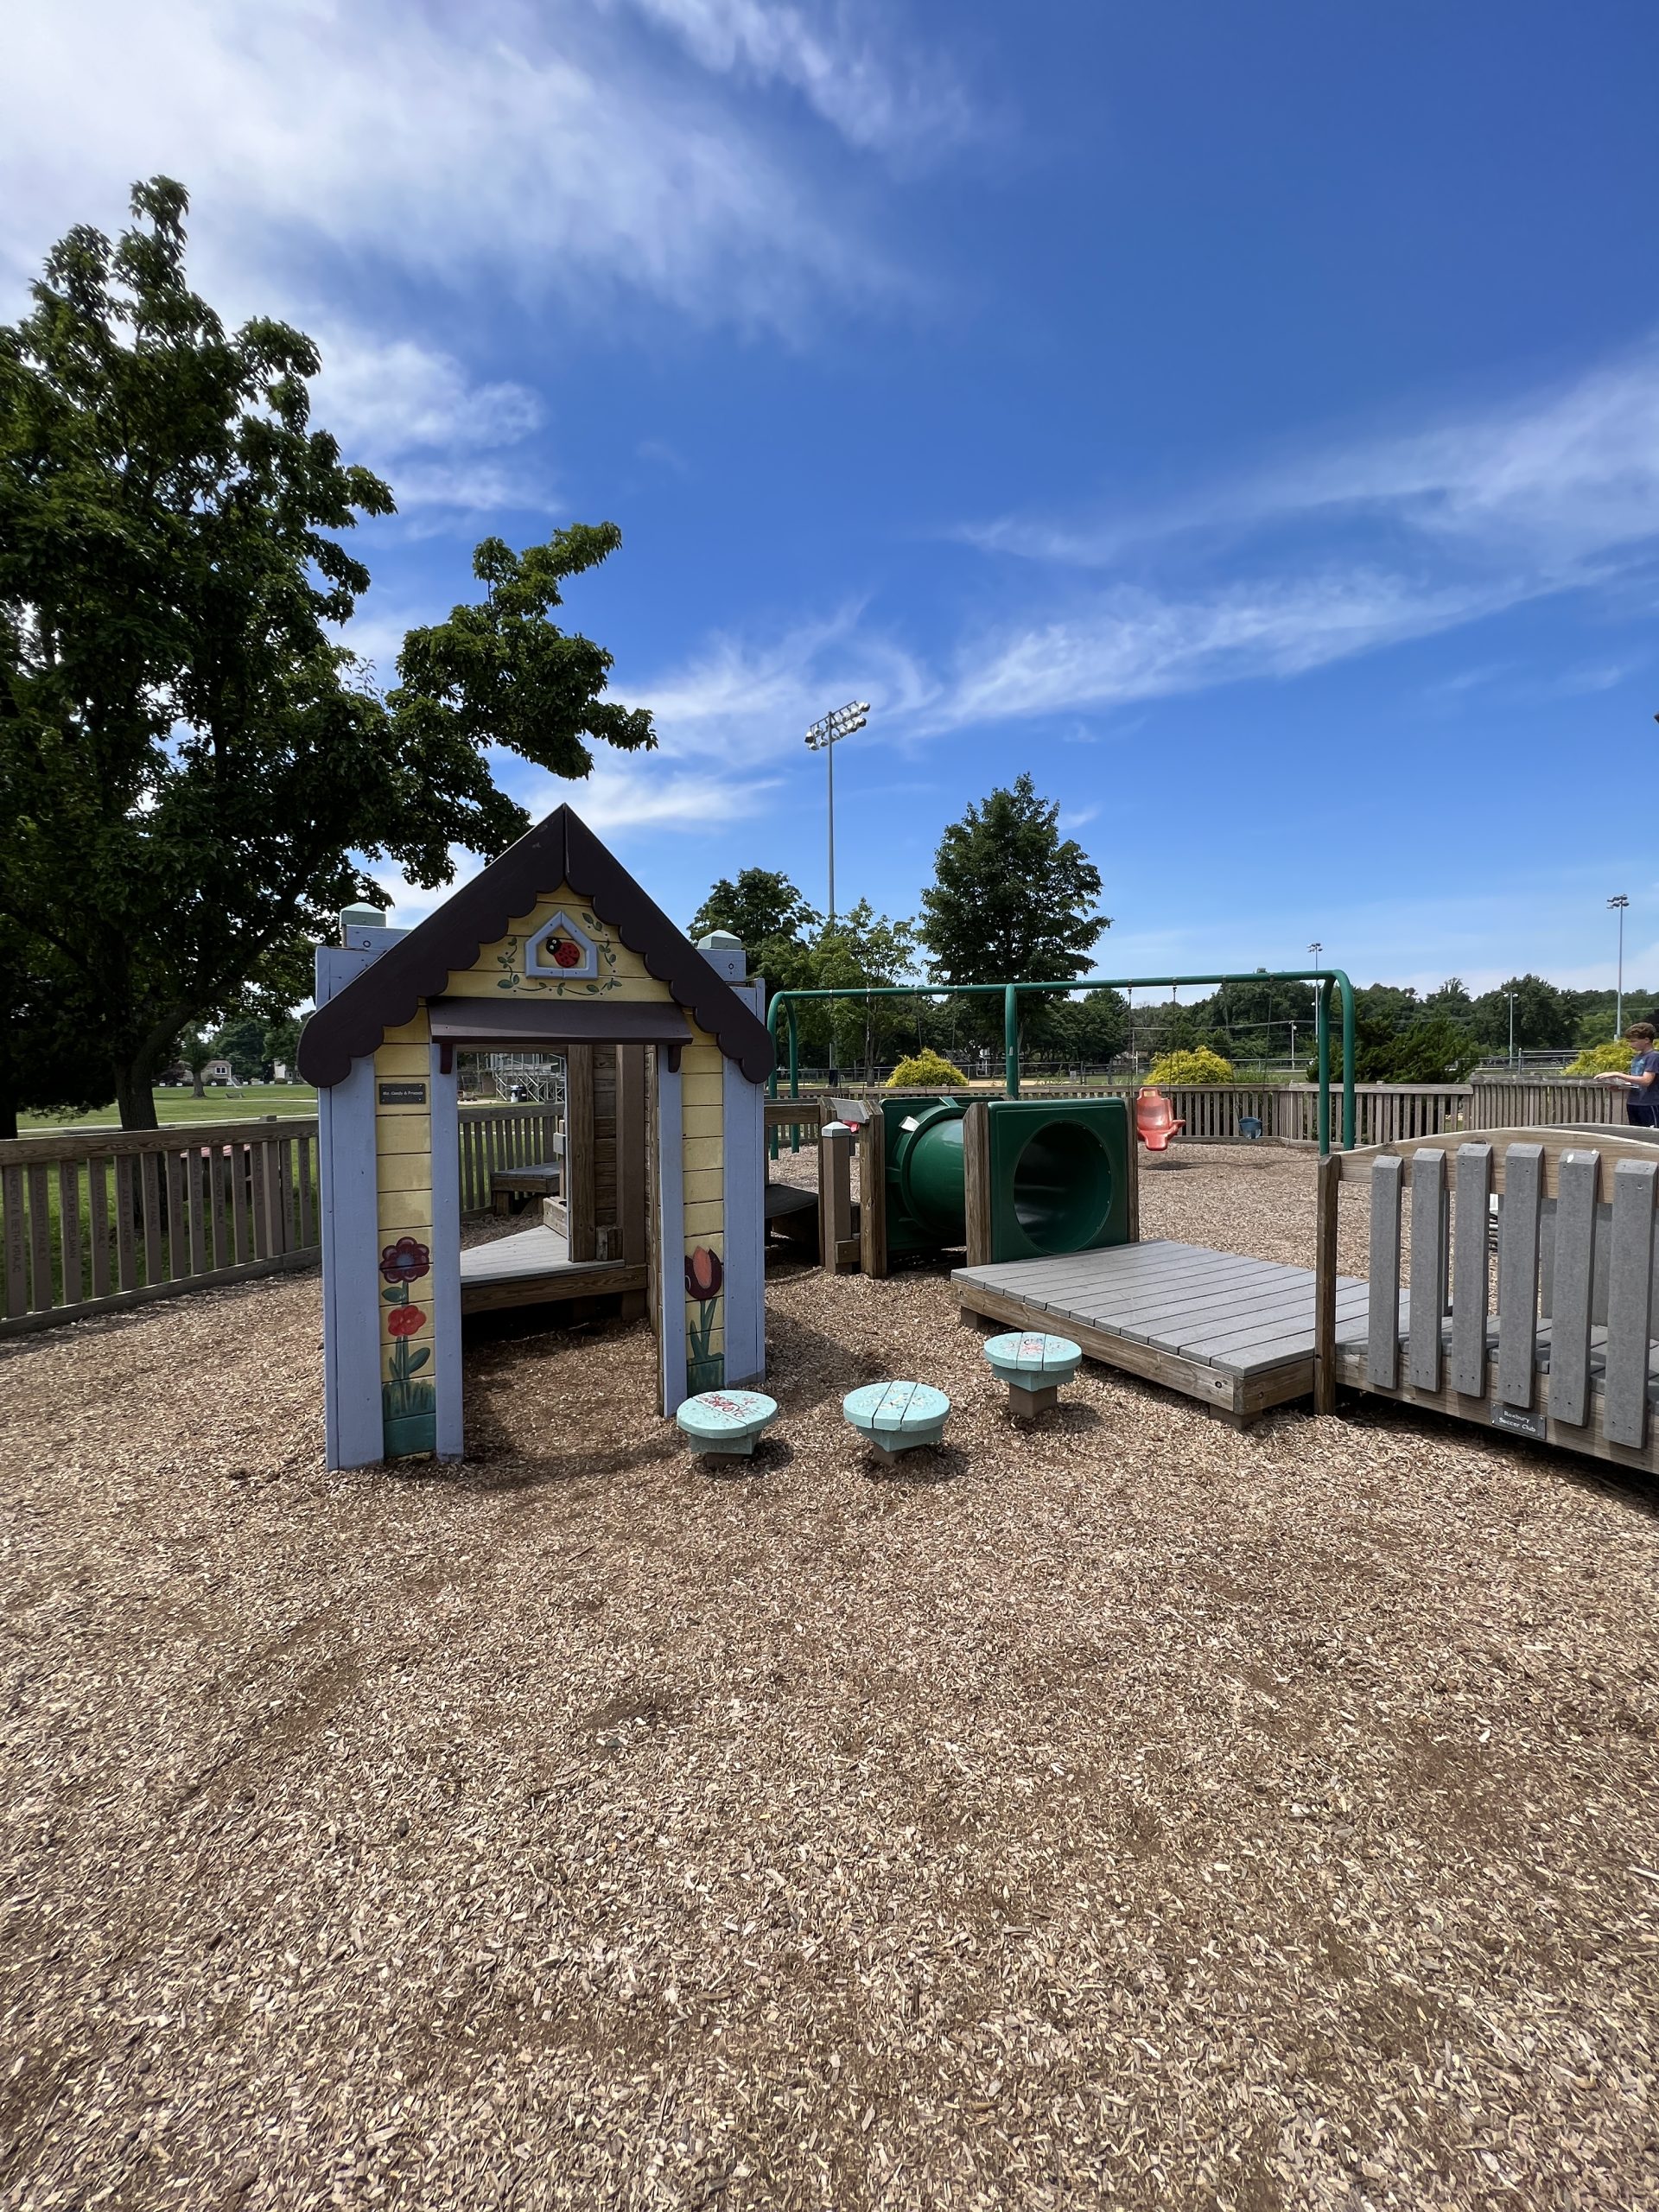 TOT LOT at Imagination Station Playground in Roxbury NJ - Playhouse, tunnel, and bridge TALL